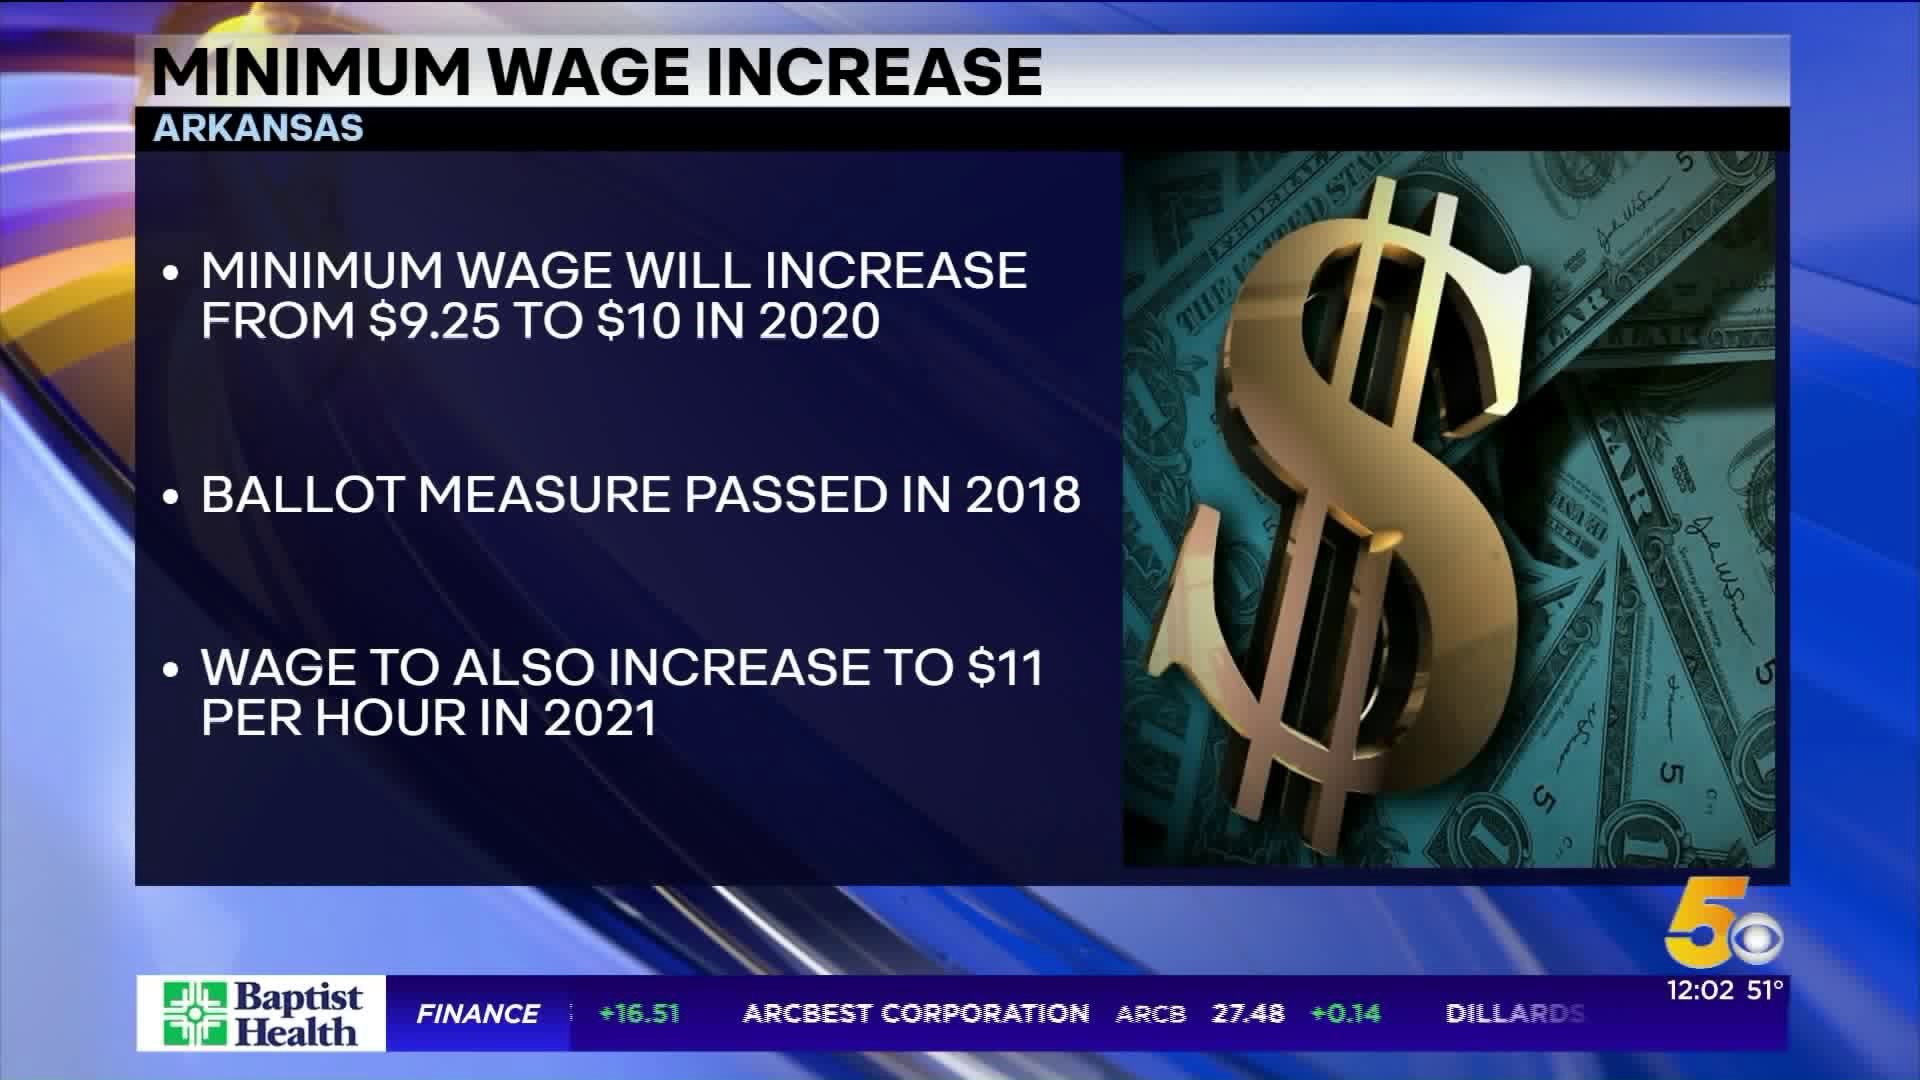 Arkansas` Minimum Wage Will Increase To $10 Per Hour In 2020